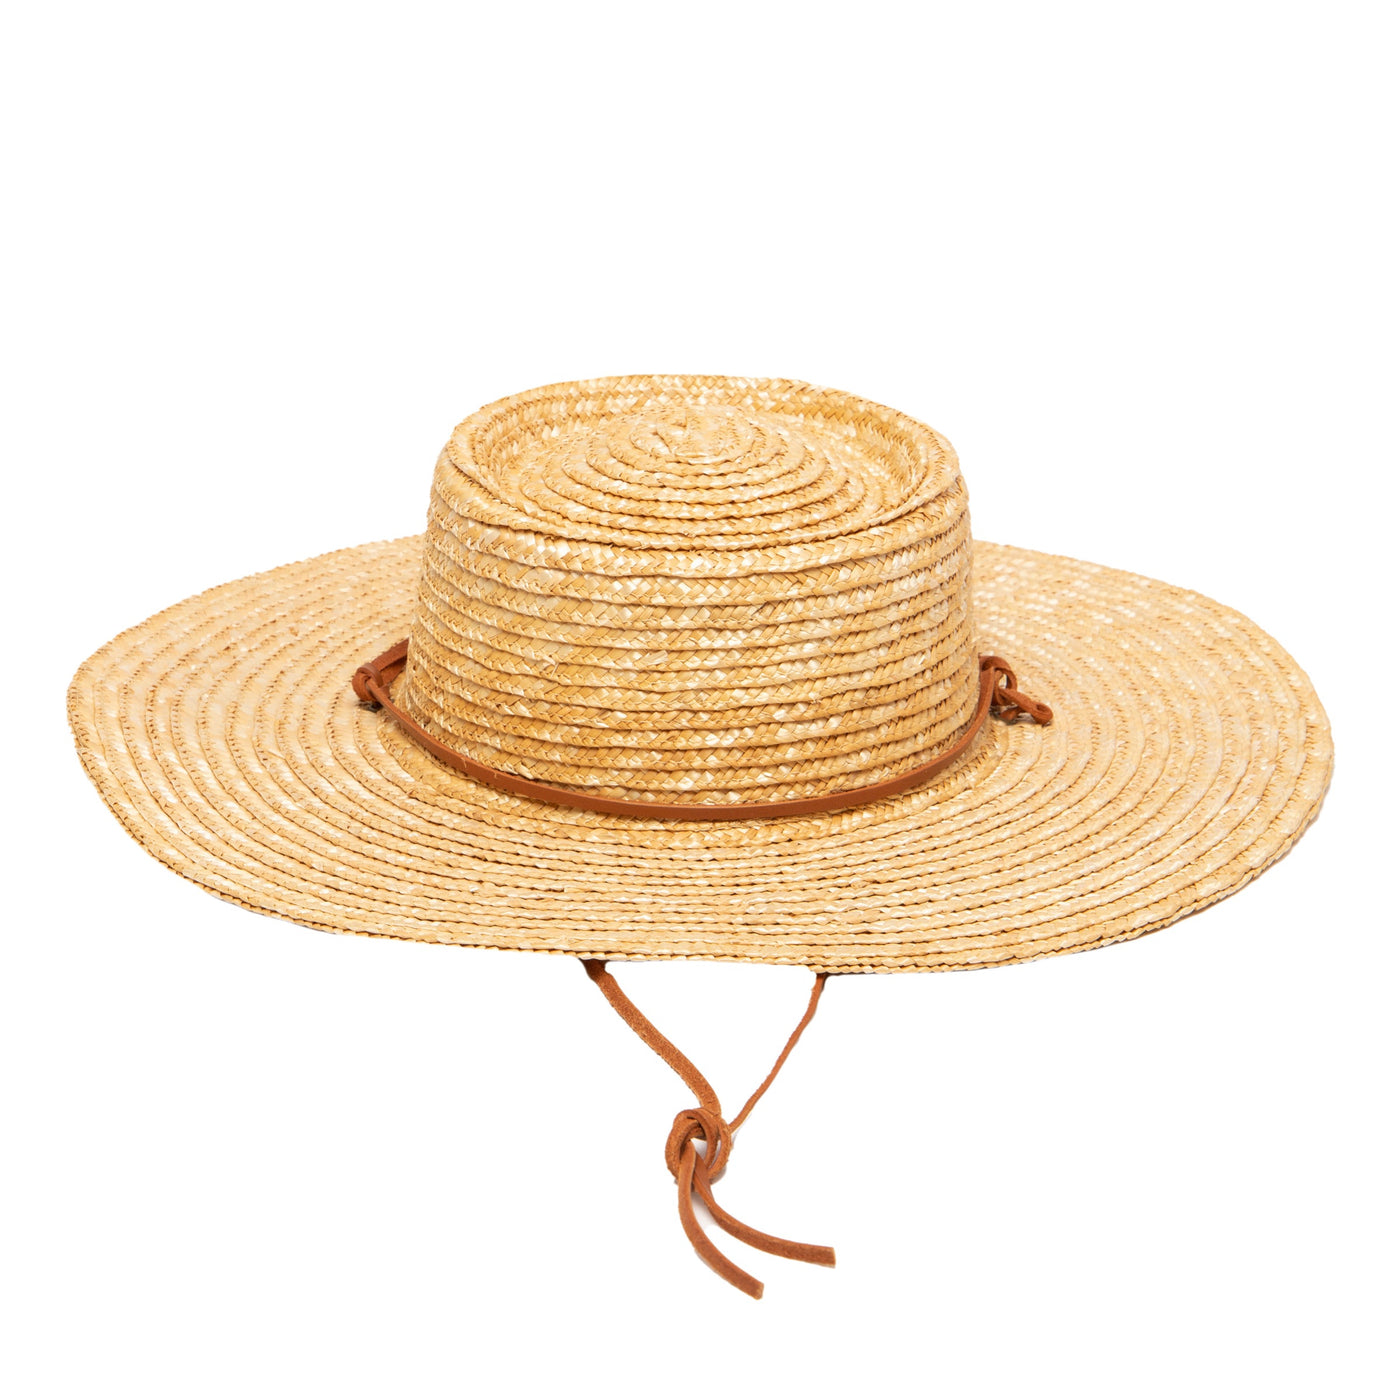 Honeydew - Women's Wheat Straw Hat With Leather Chin Cord